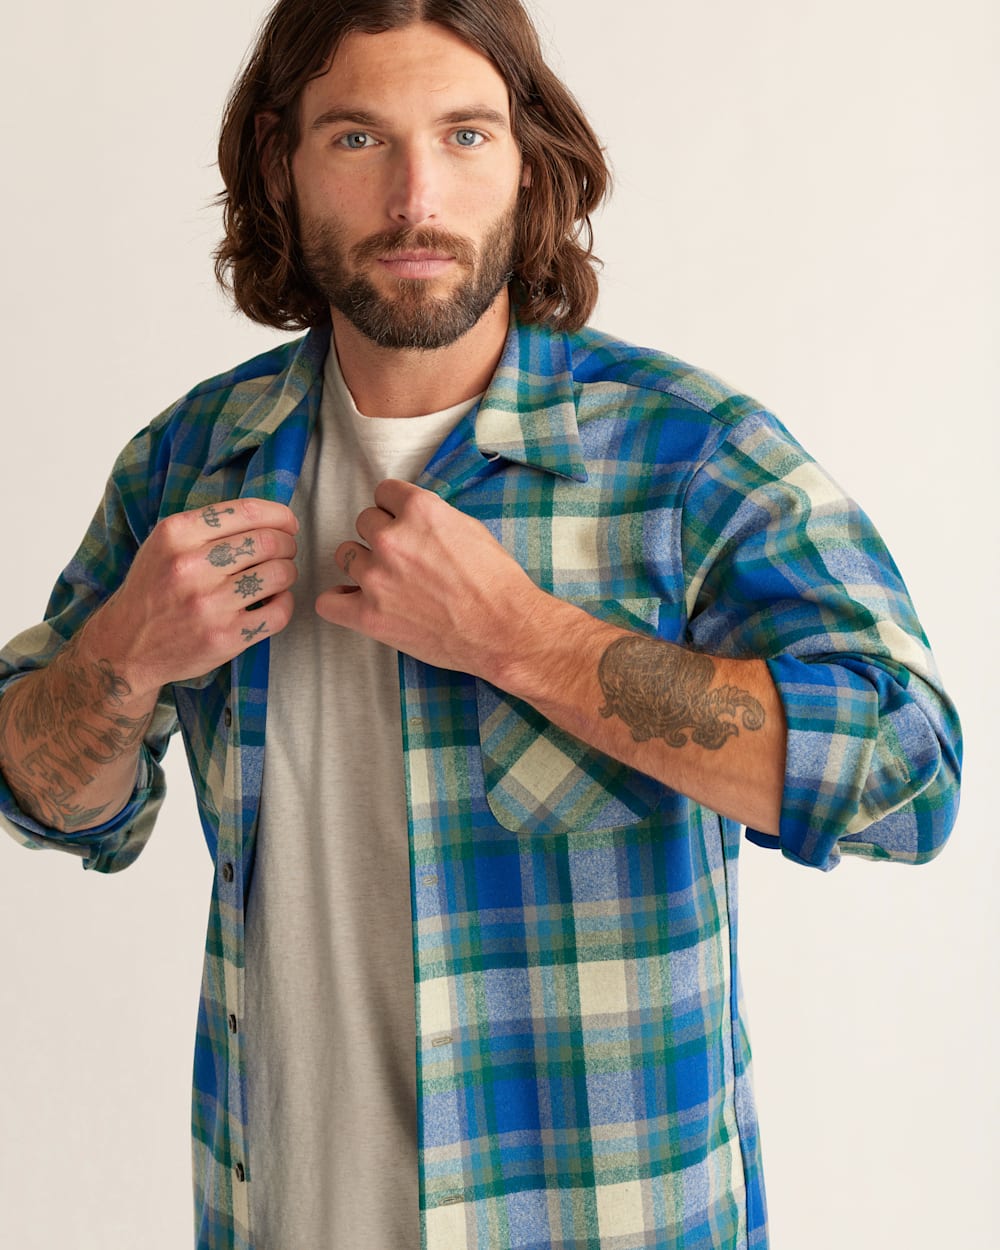 Navy Plaid Flannel Shirt Jacket with White and Violet Crew-neck T-shirt  Outfits For Men (2 ideas & outfits)